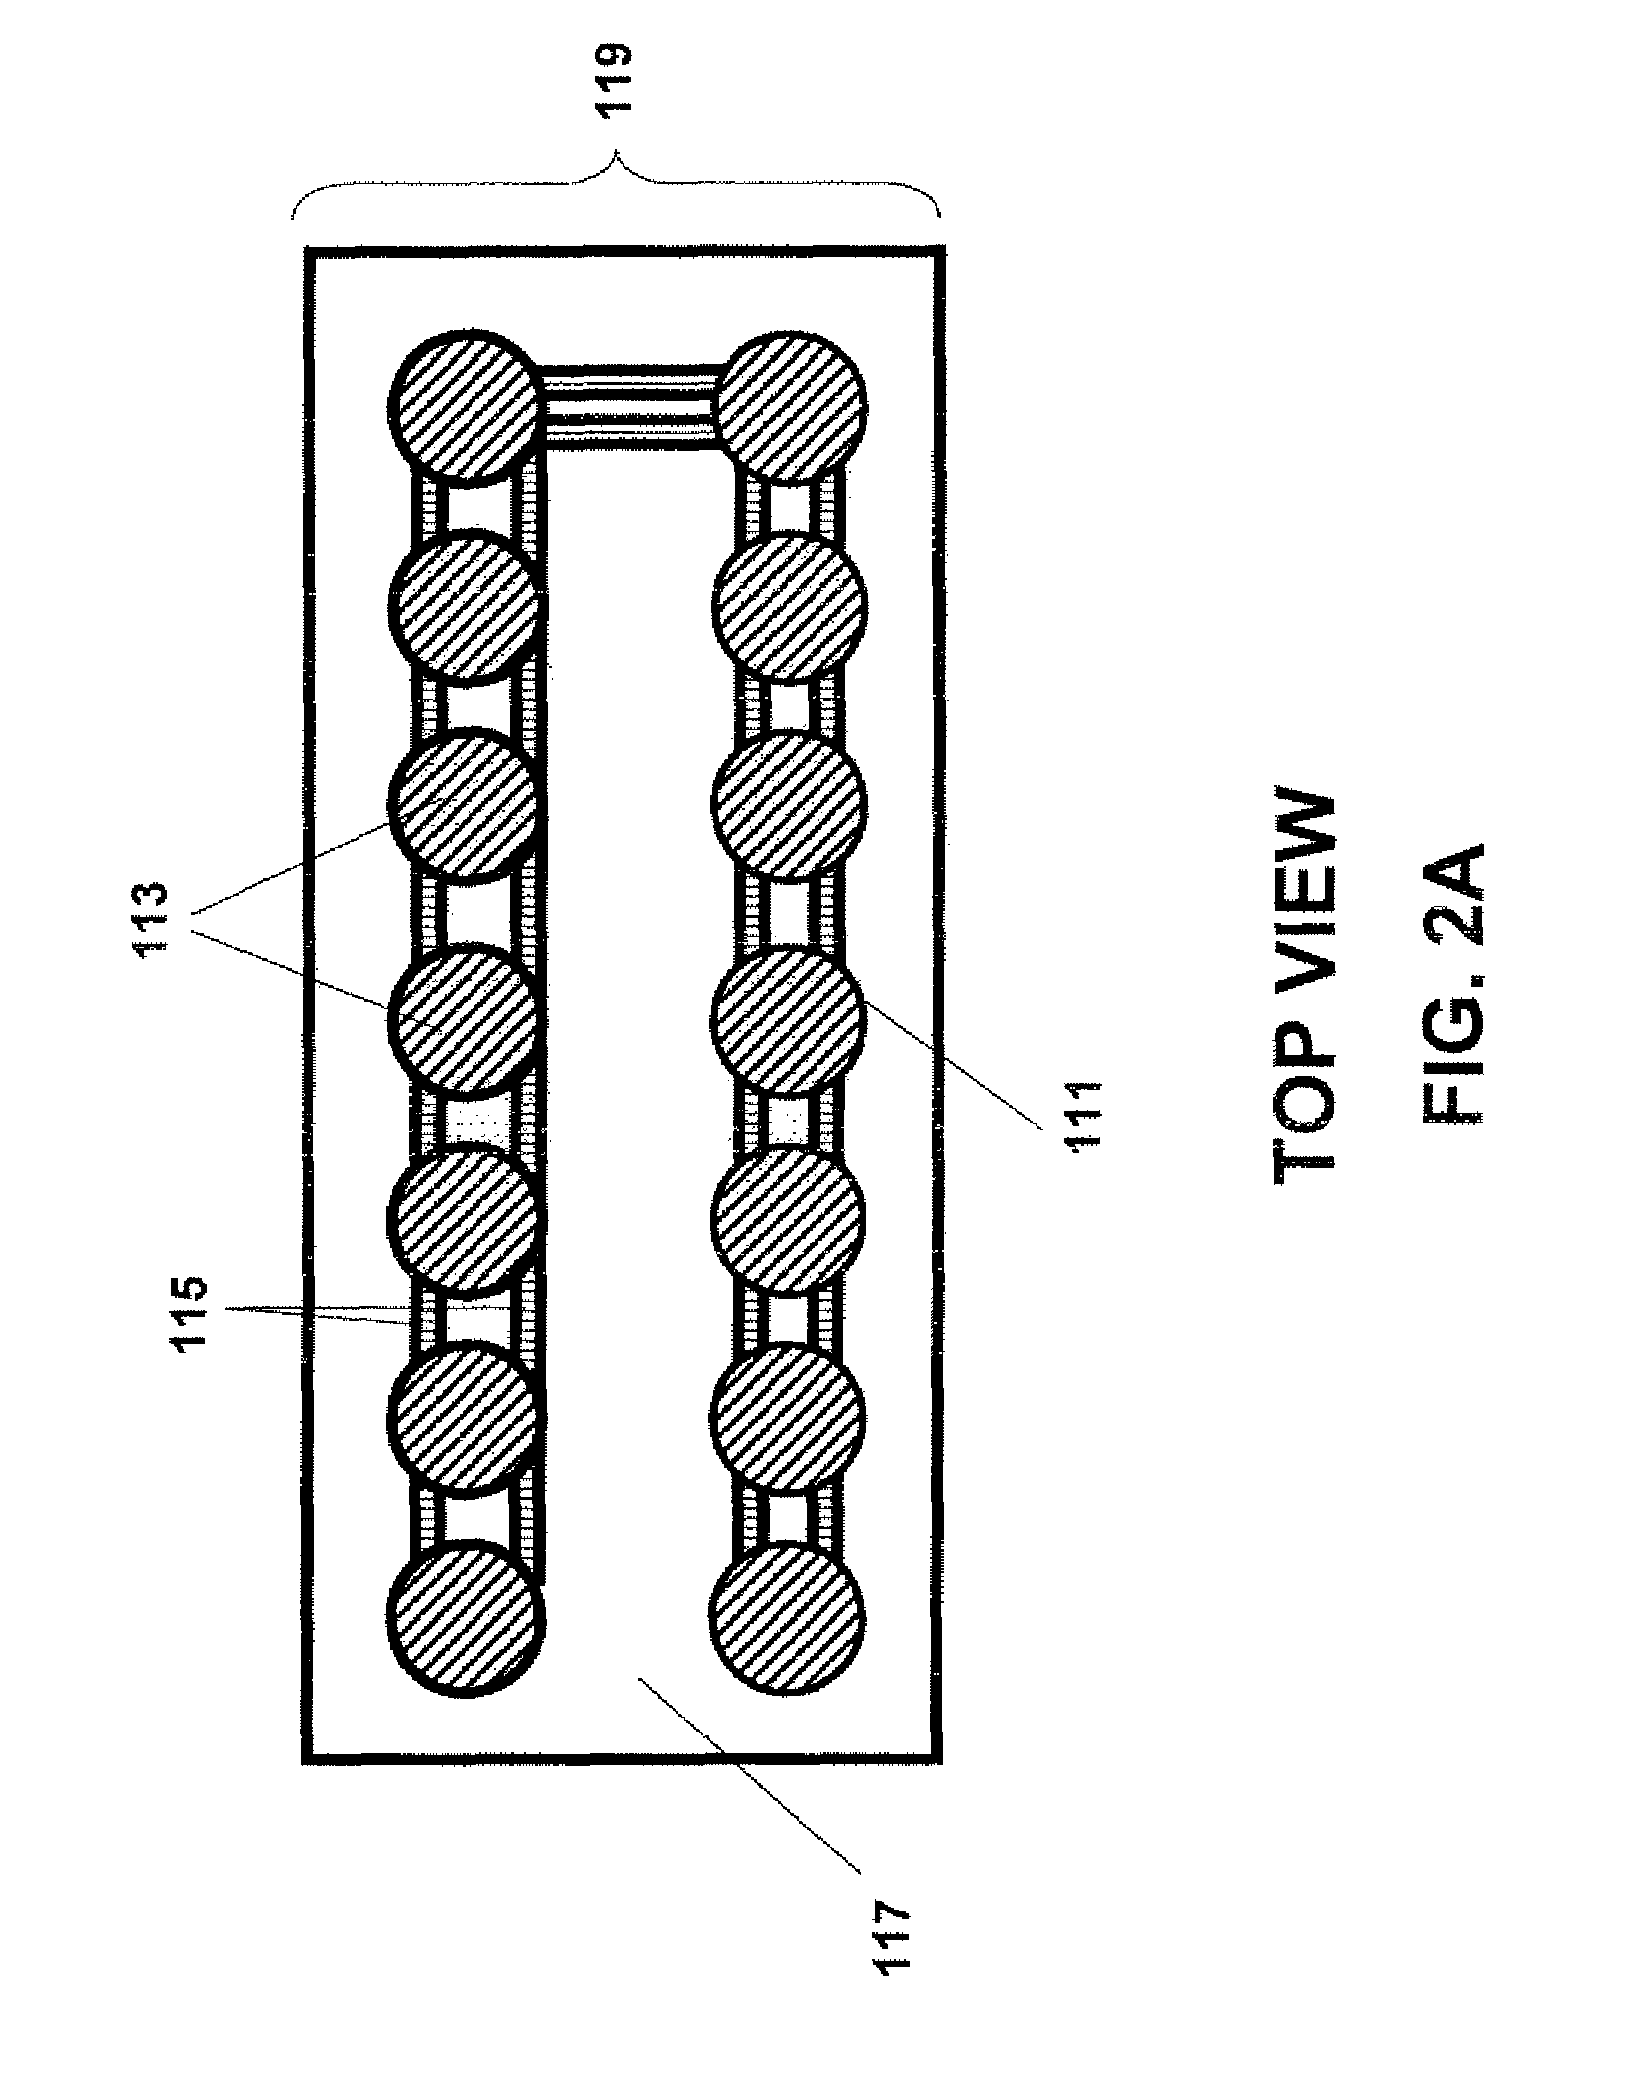 Photovoltaic devices with silicon dioxide encapsulation layer and method to make same